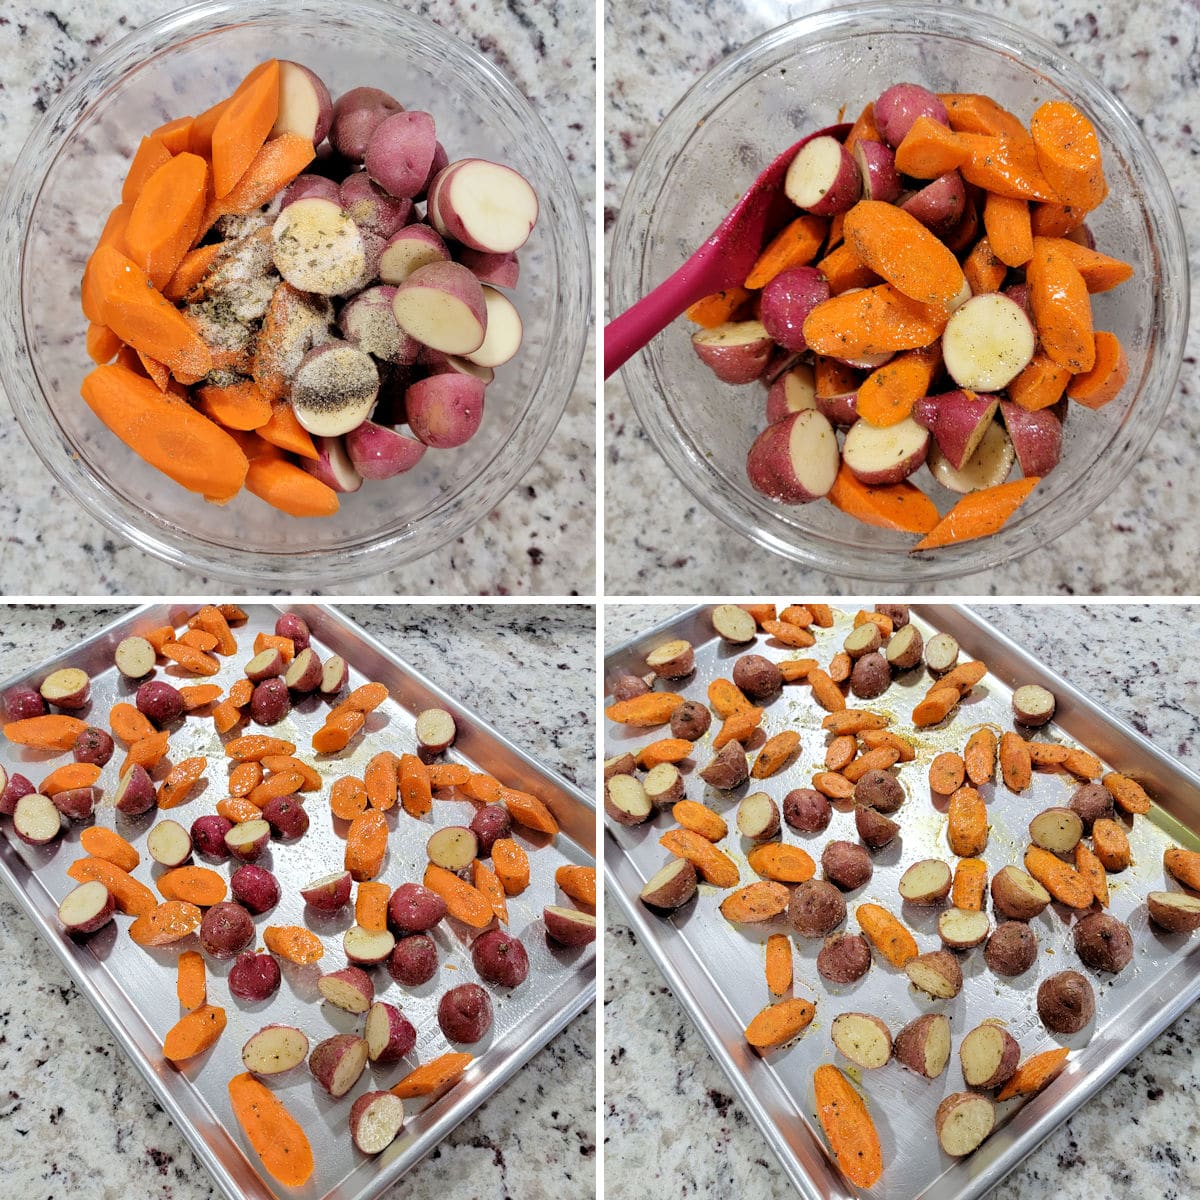 Preparing potatoes and carrots for roasting on a sheet pan.